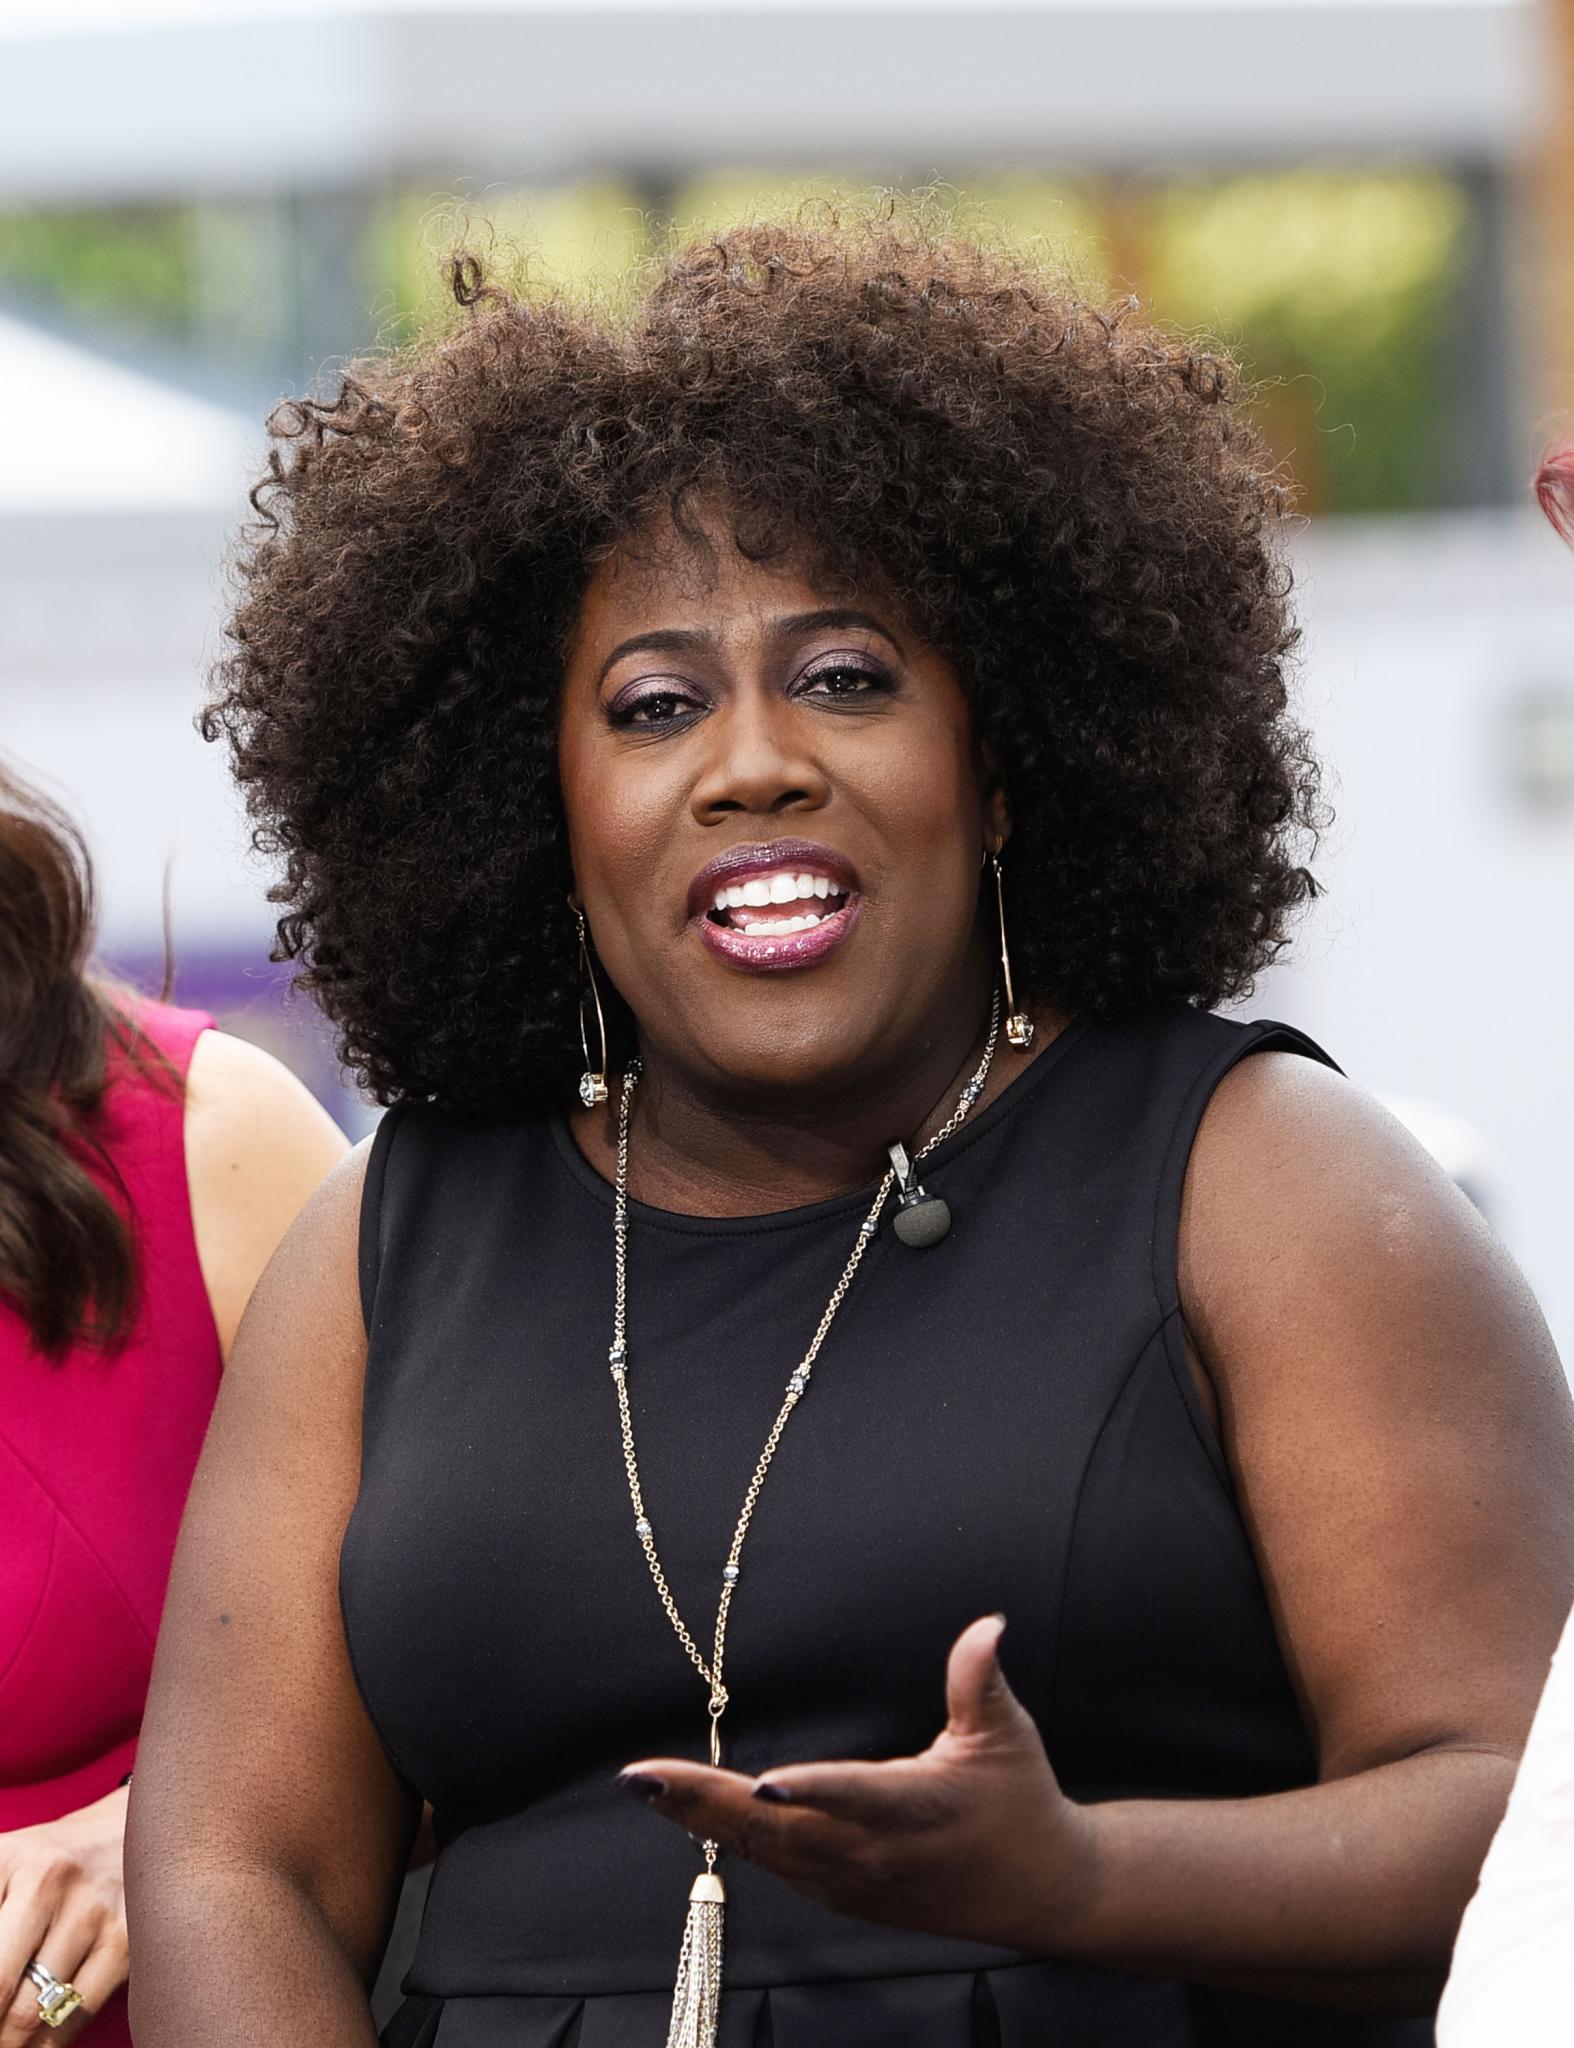 Sheryl Underwood Breaks Down While Discussing Police Brutality On 'The Talk'
